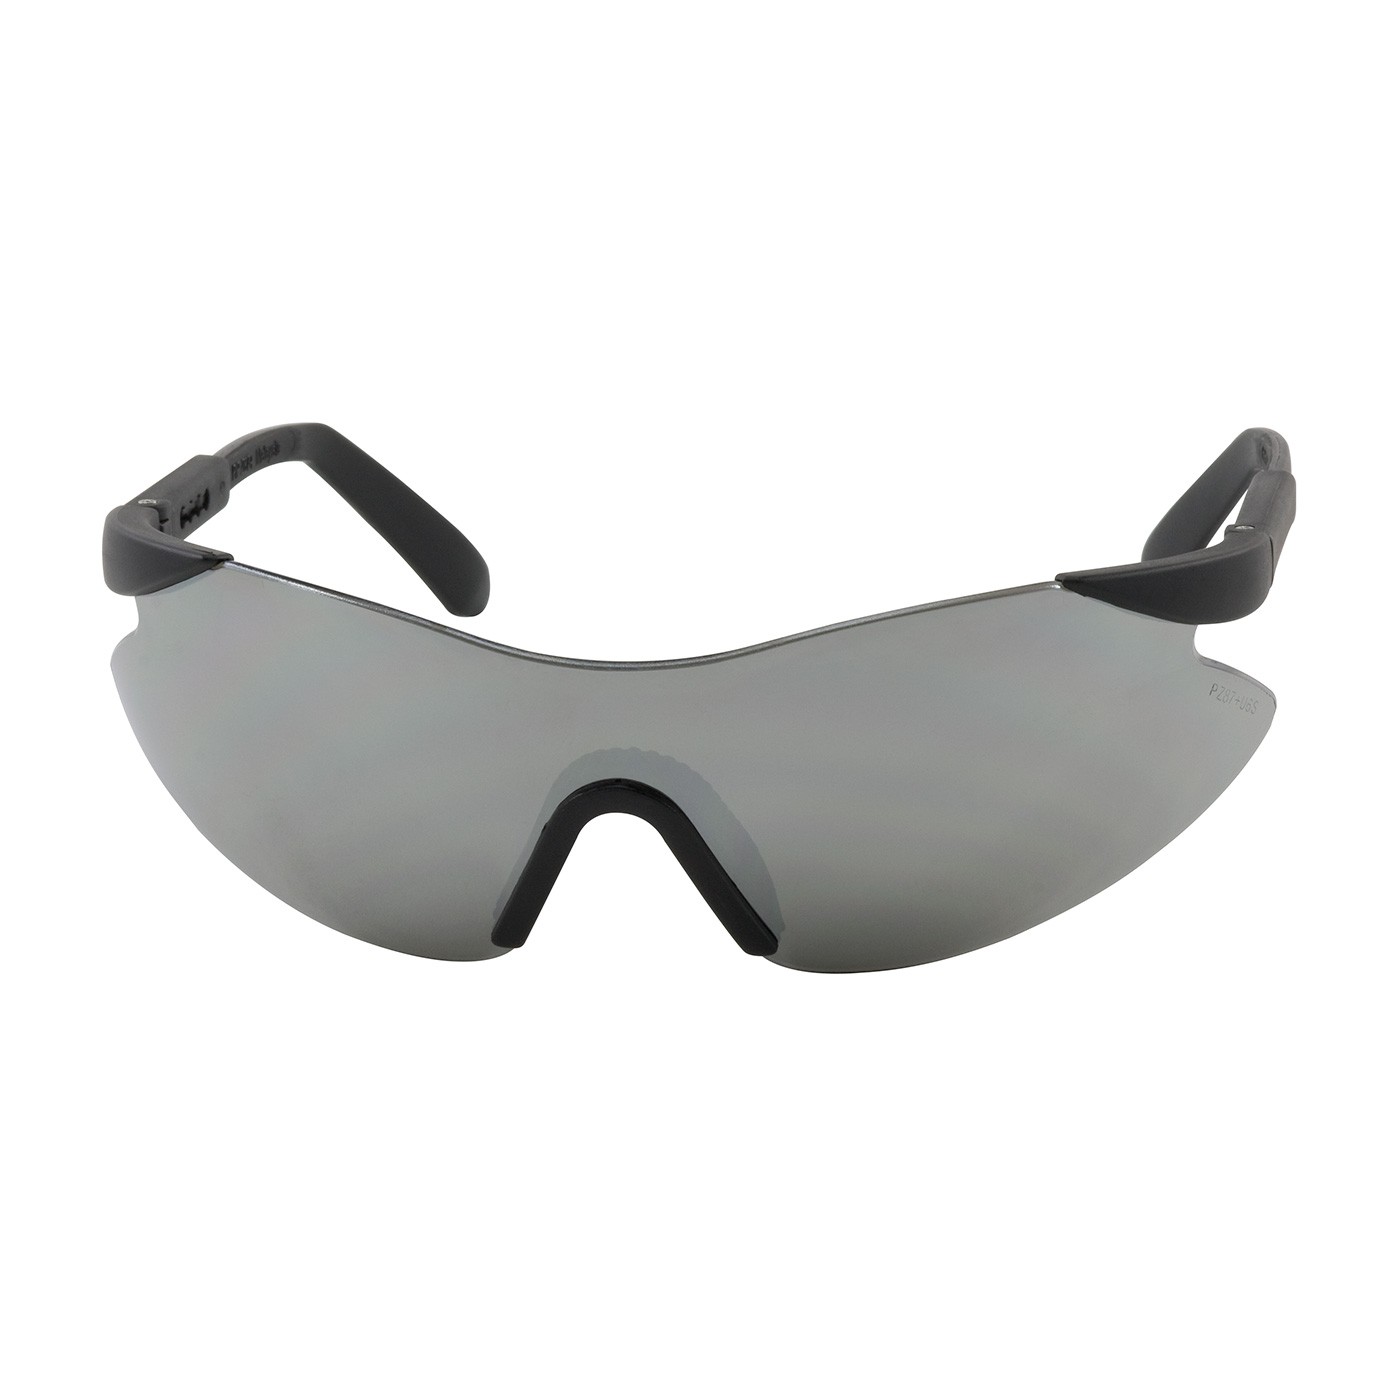 Wilco™ Rimless Safety Glasses with Black Temple, Silver Mirror Lens and Anti-Scratch Coating  (#250-92-0005)